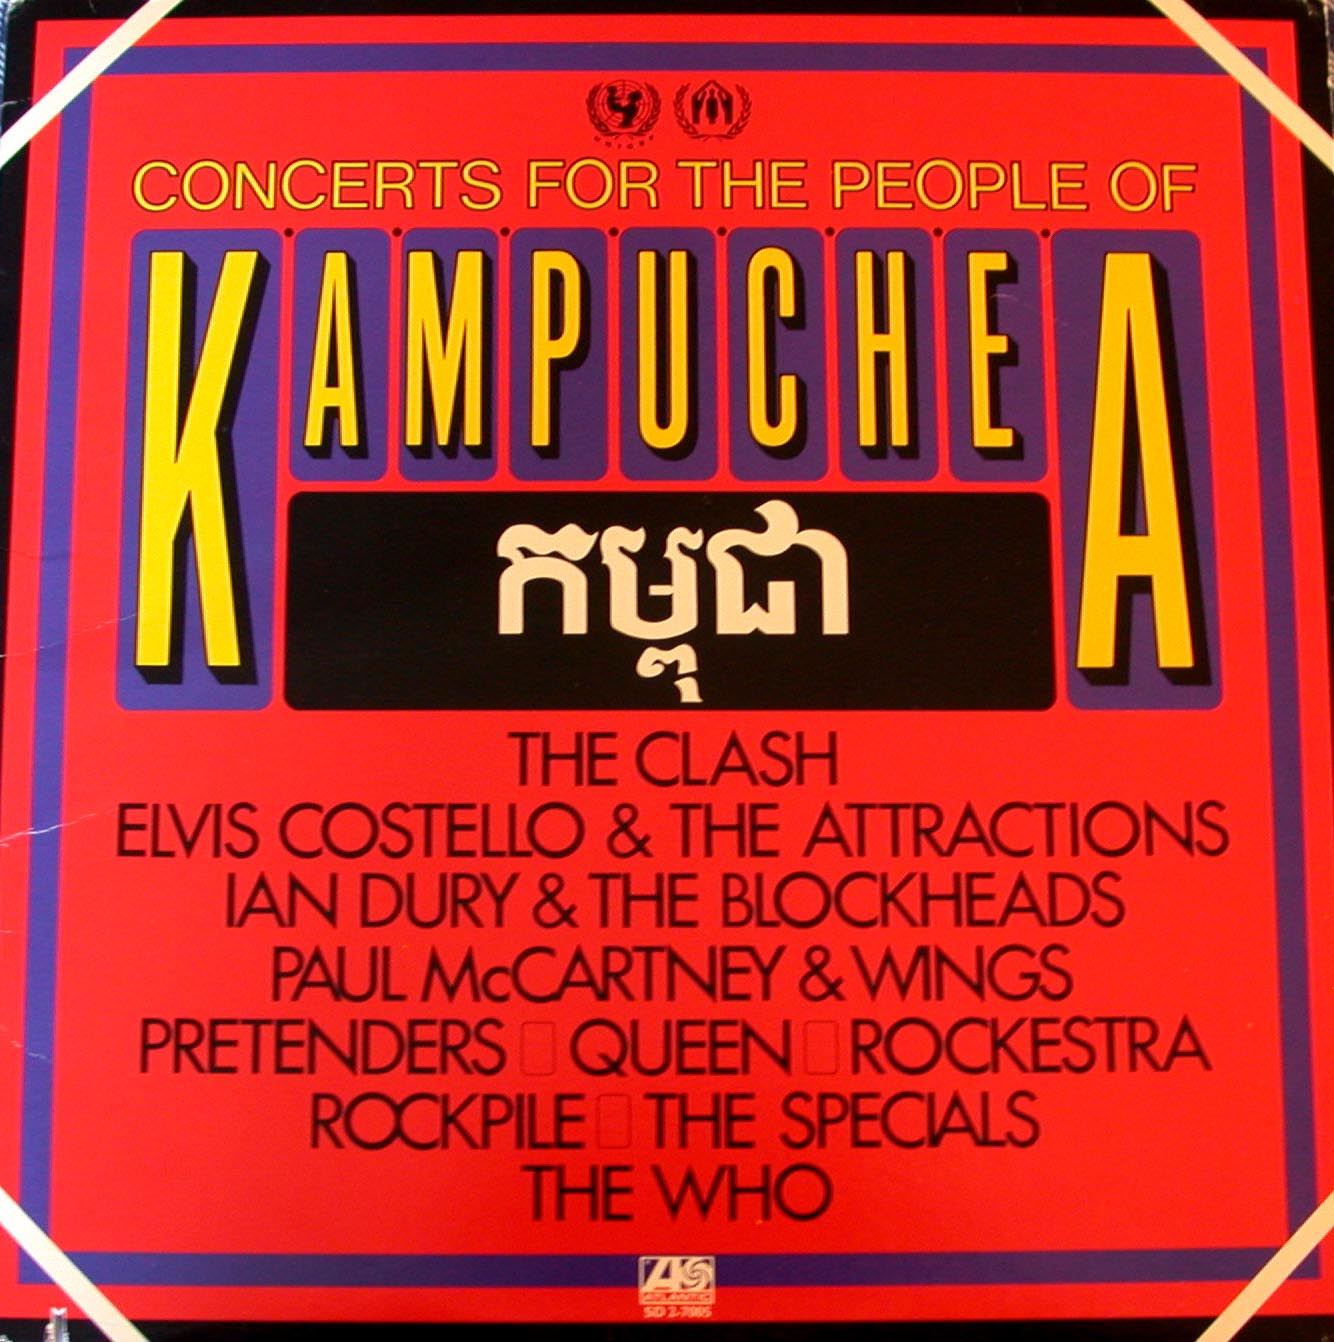 concerts for kampuchea